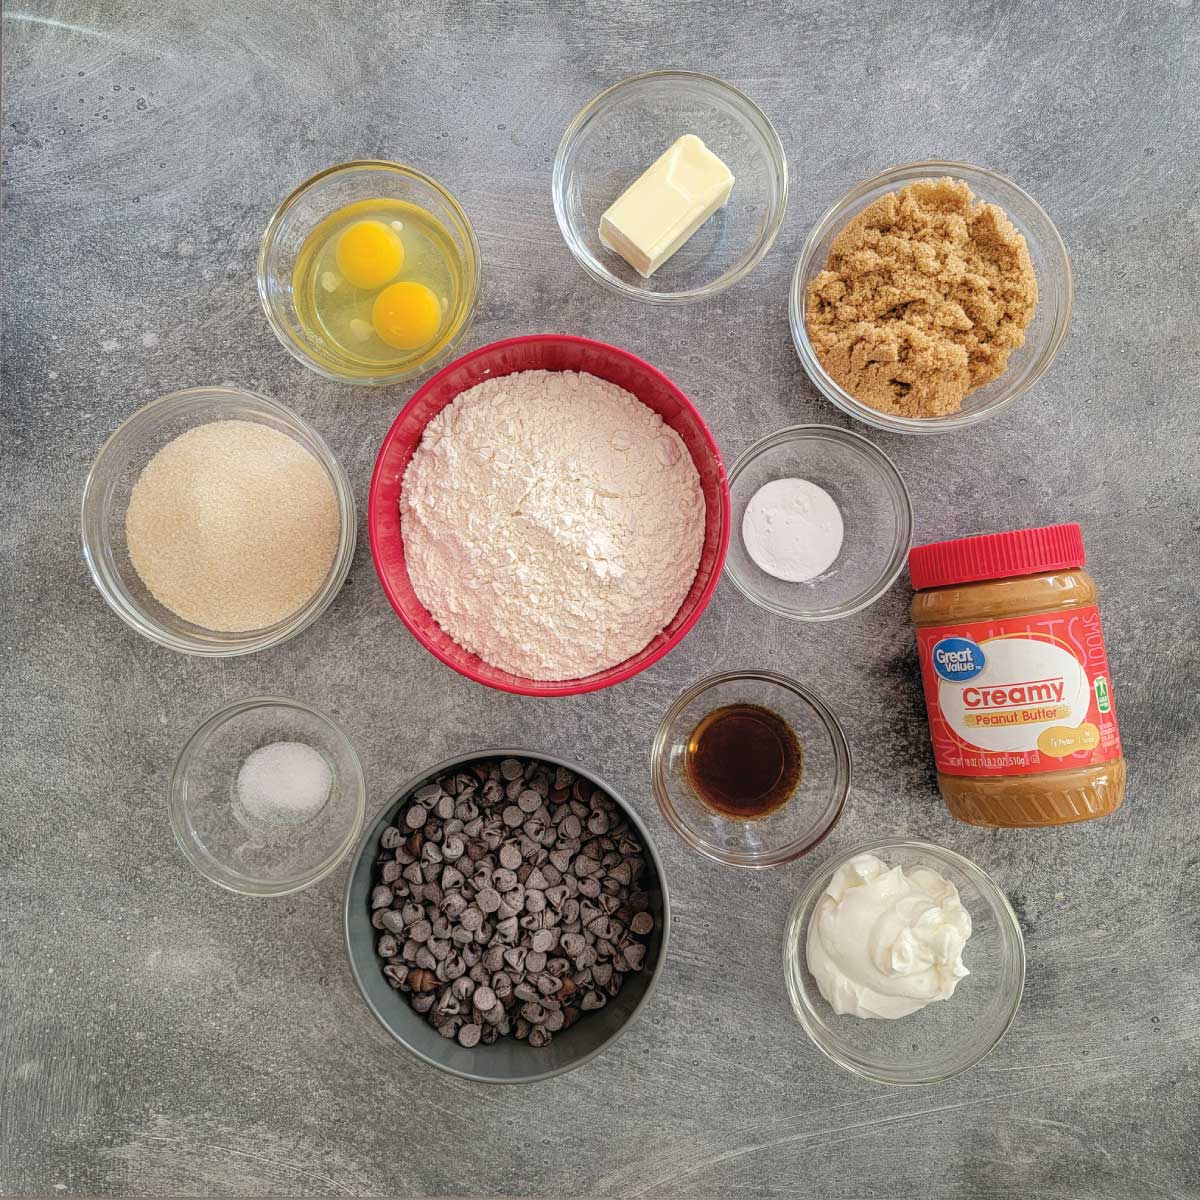 Ingredients for the cookies - butter, brown sugar, baking soda, flour, sugar, salt, chocolate chips, vanilla extract, yogurt and peanut butter.